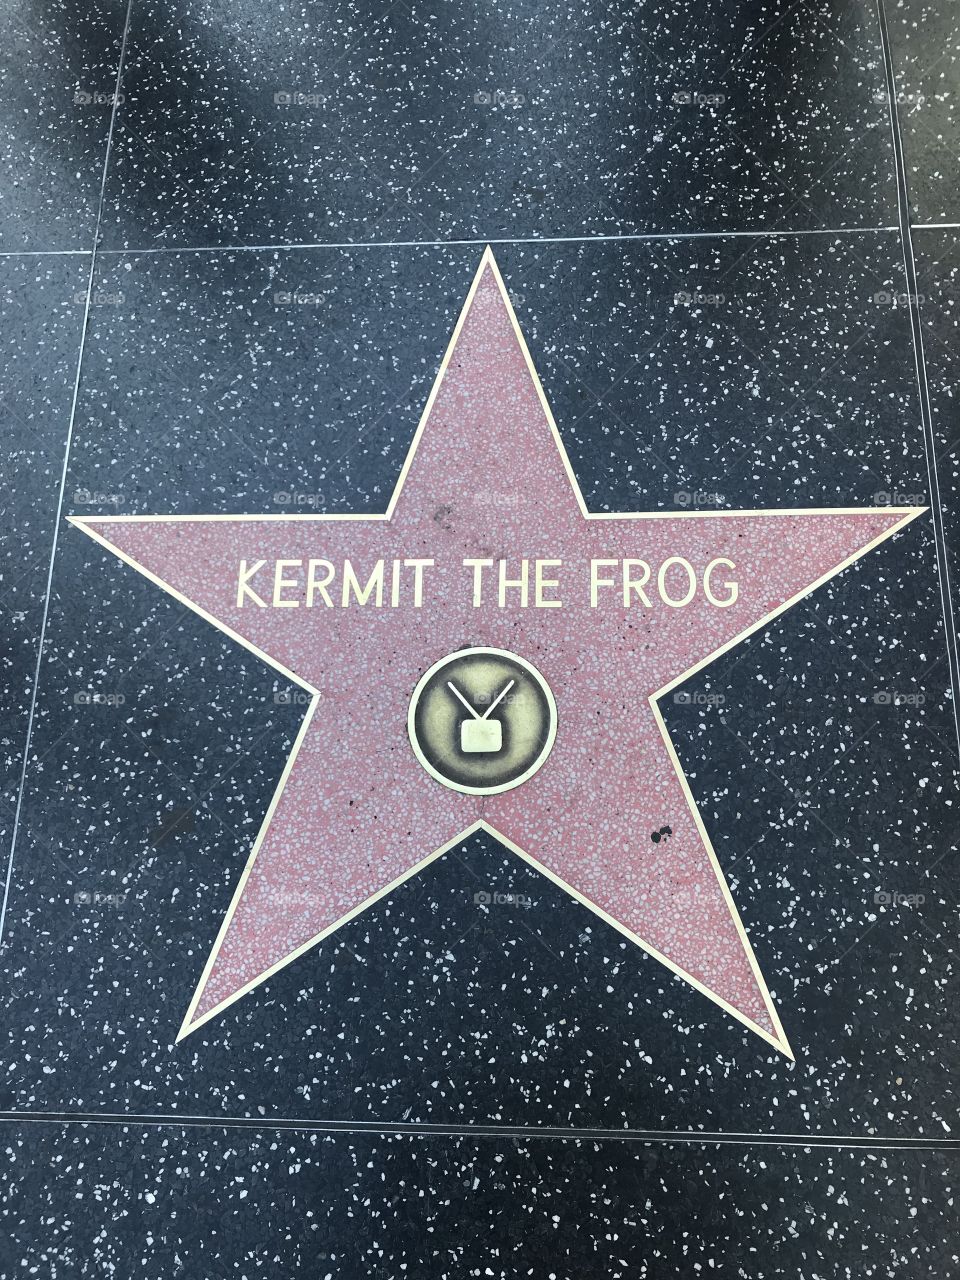 Hollywood square Kermit the Frog